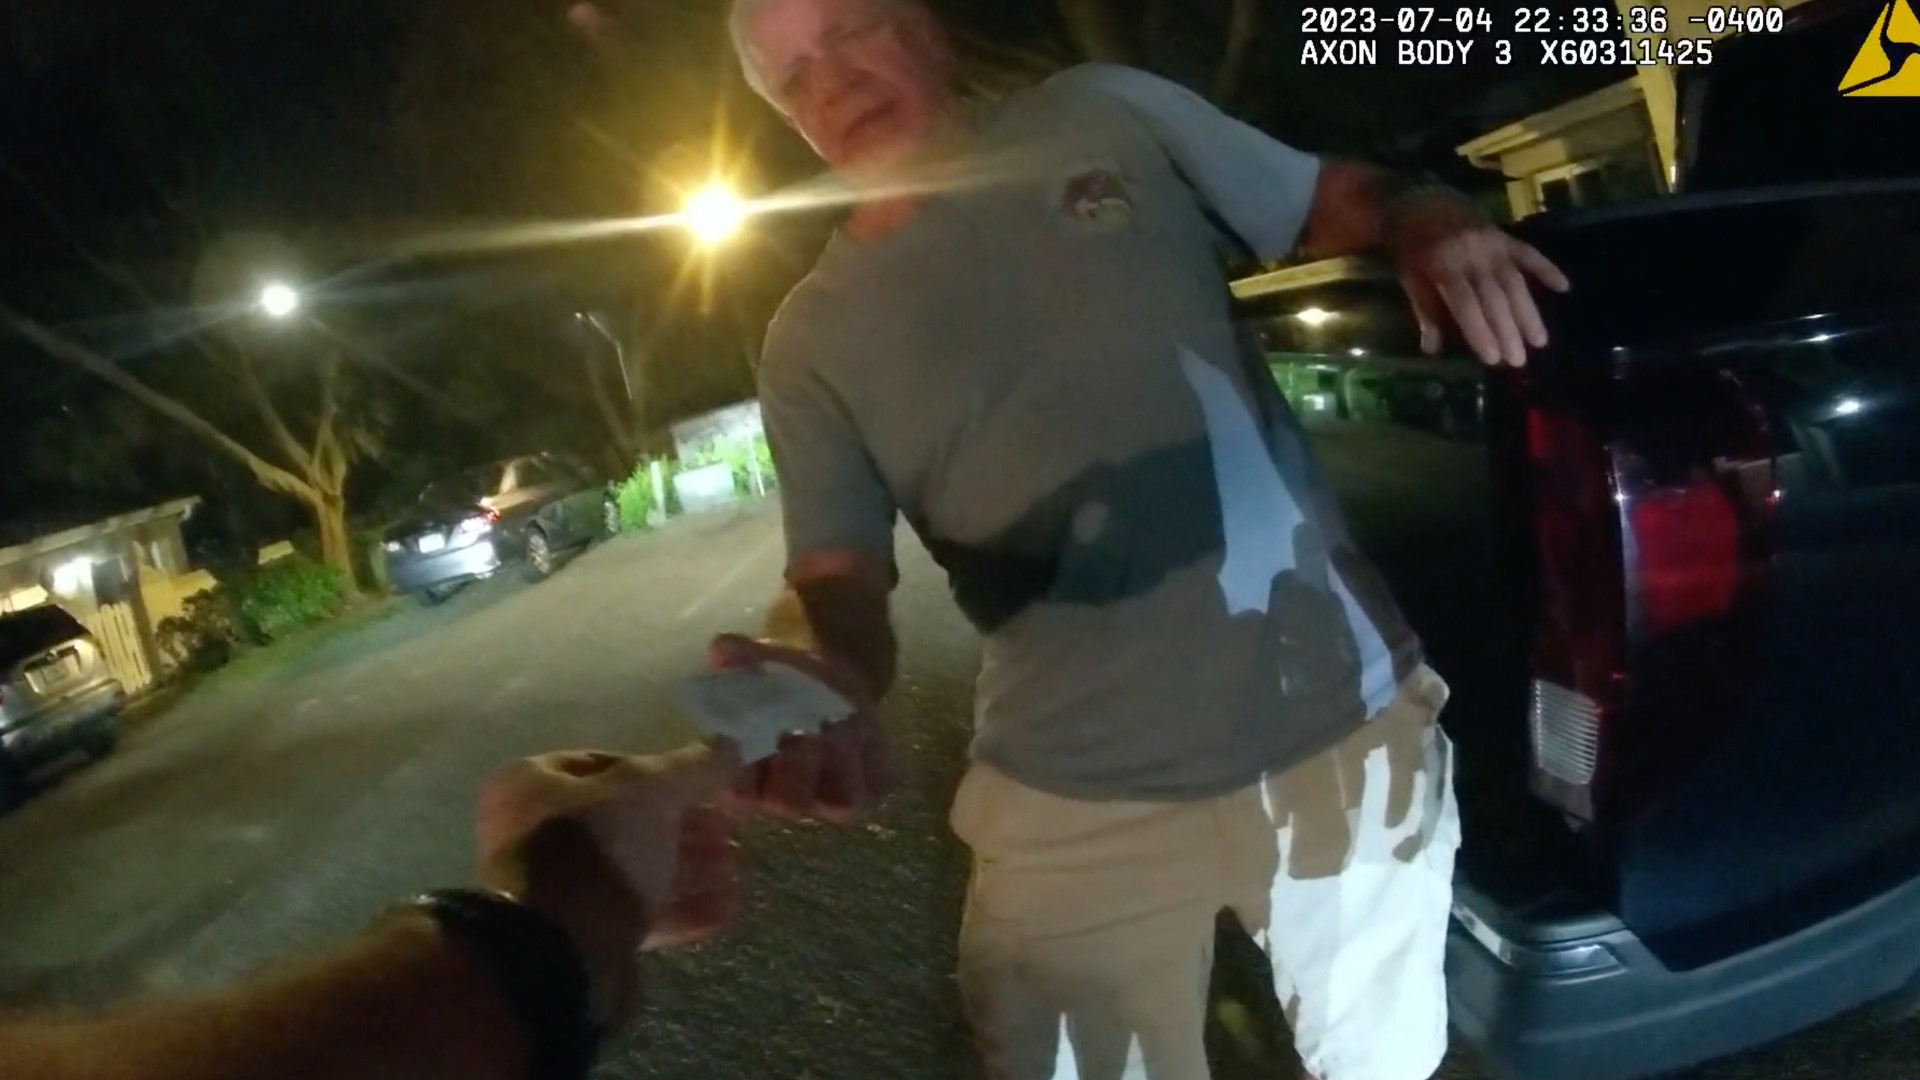 Body-camera video shows a federal prosecutor offering police his card in an apparent attempt to leverage his position to blunt the fallout from a DUI crash arrest.